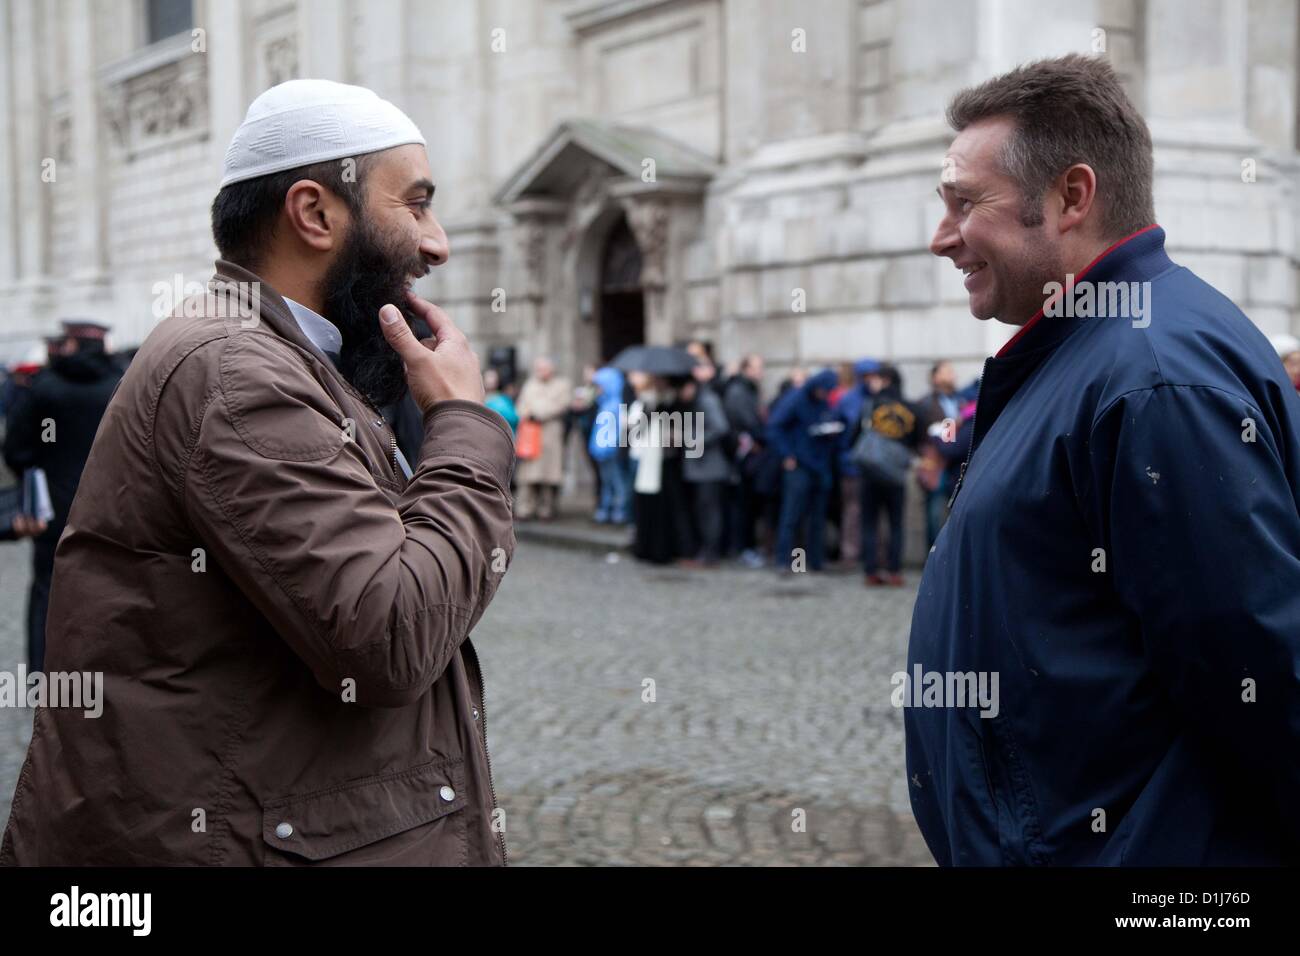 London, UK. 24th December 2012 A member of a radical Muslim group has a debate with a passer by, while people are queuing in the background to get into St Paul's Cathedral.  The group of Muslims had gathered outside the cathedral and set up stalls and handed out leaflets.  There were various complaints to officers from the people queuing nearby to enter St Paul’s Cathedral where they were attending a service. Stock Photo